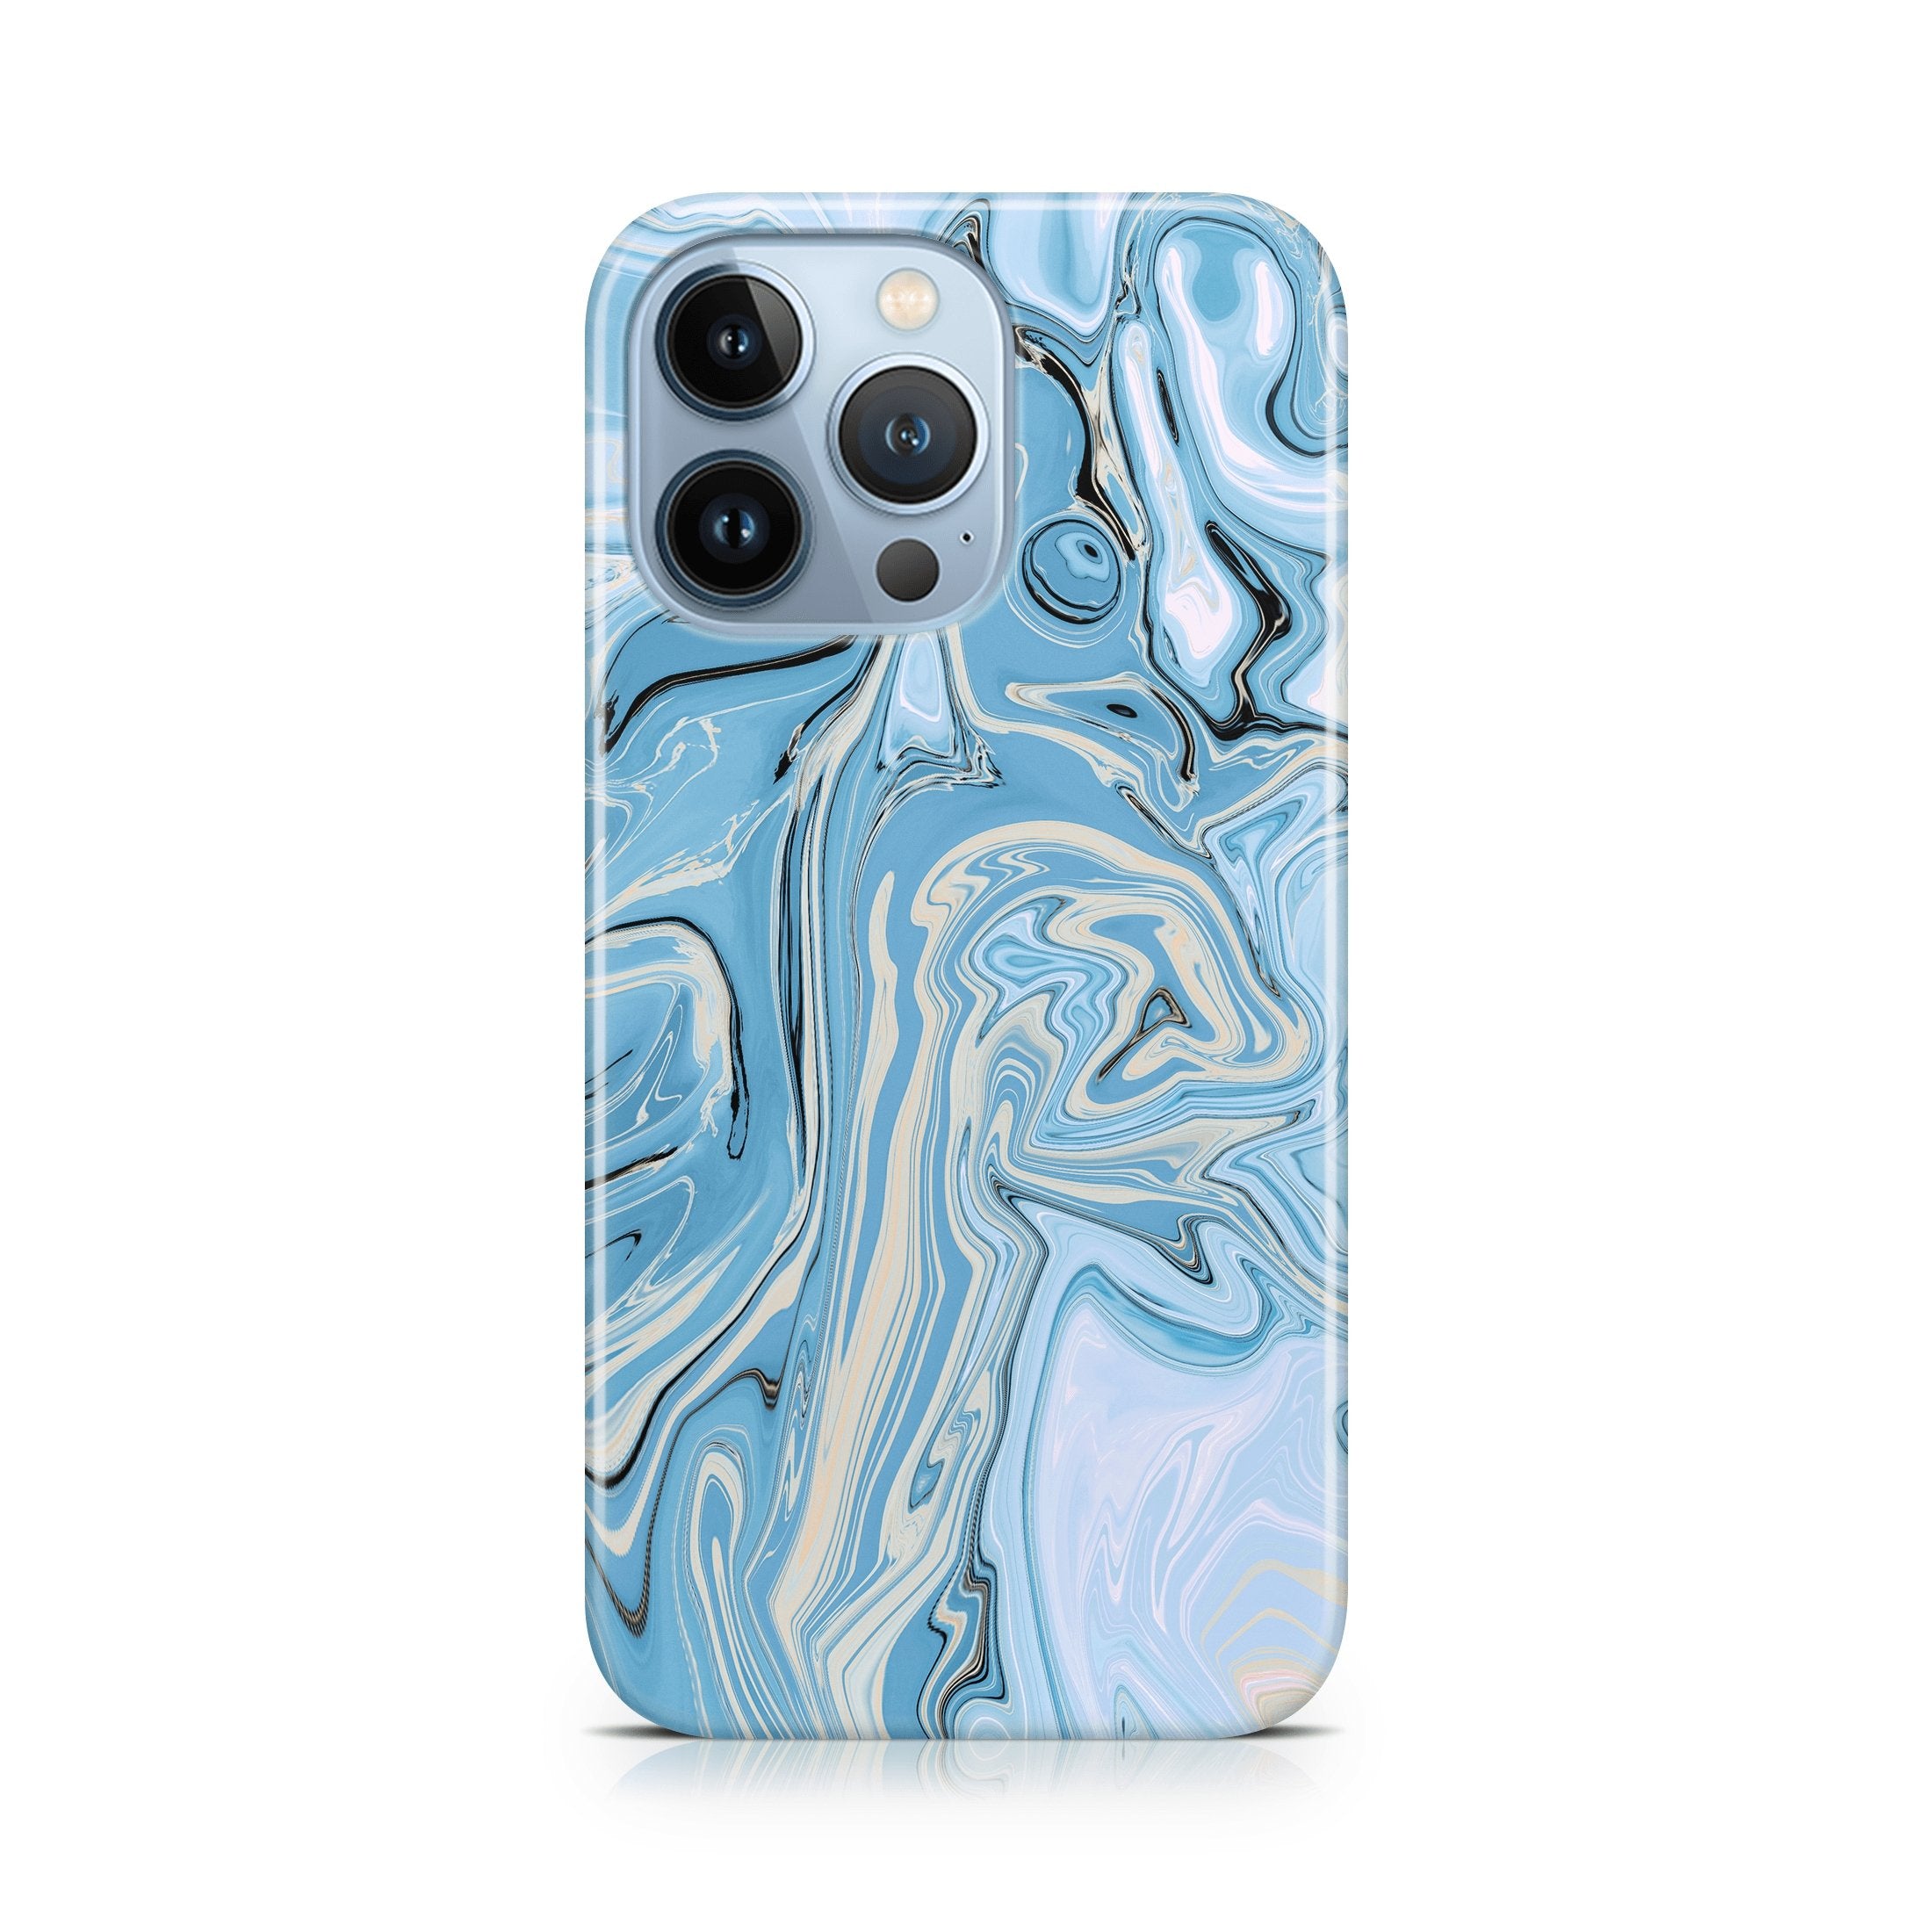 Blue & Creme Agate - iPhone phone case designs by CaseSwagger